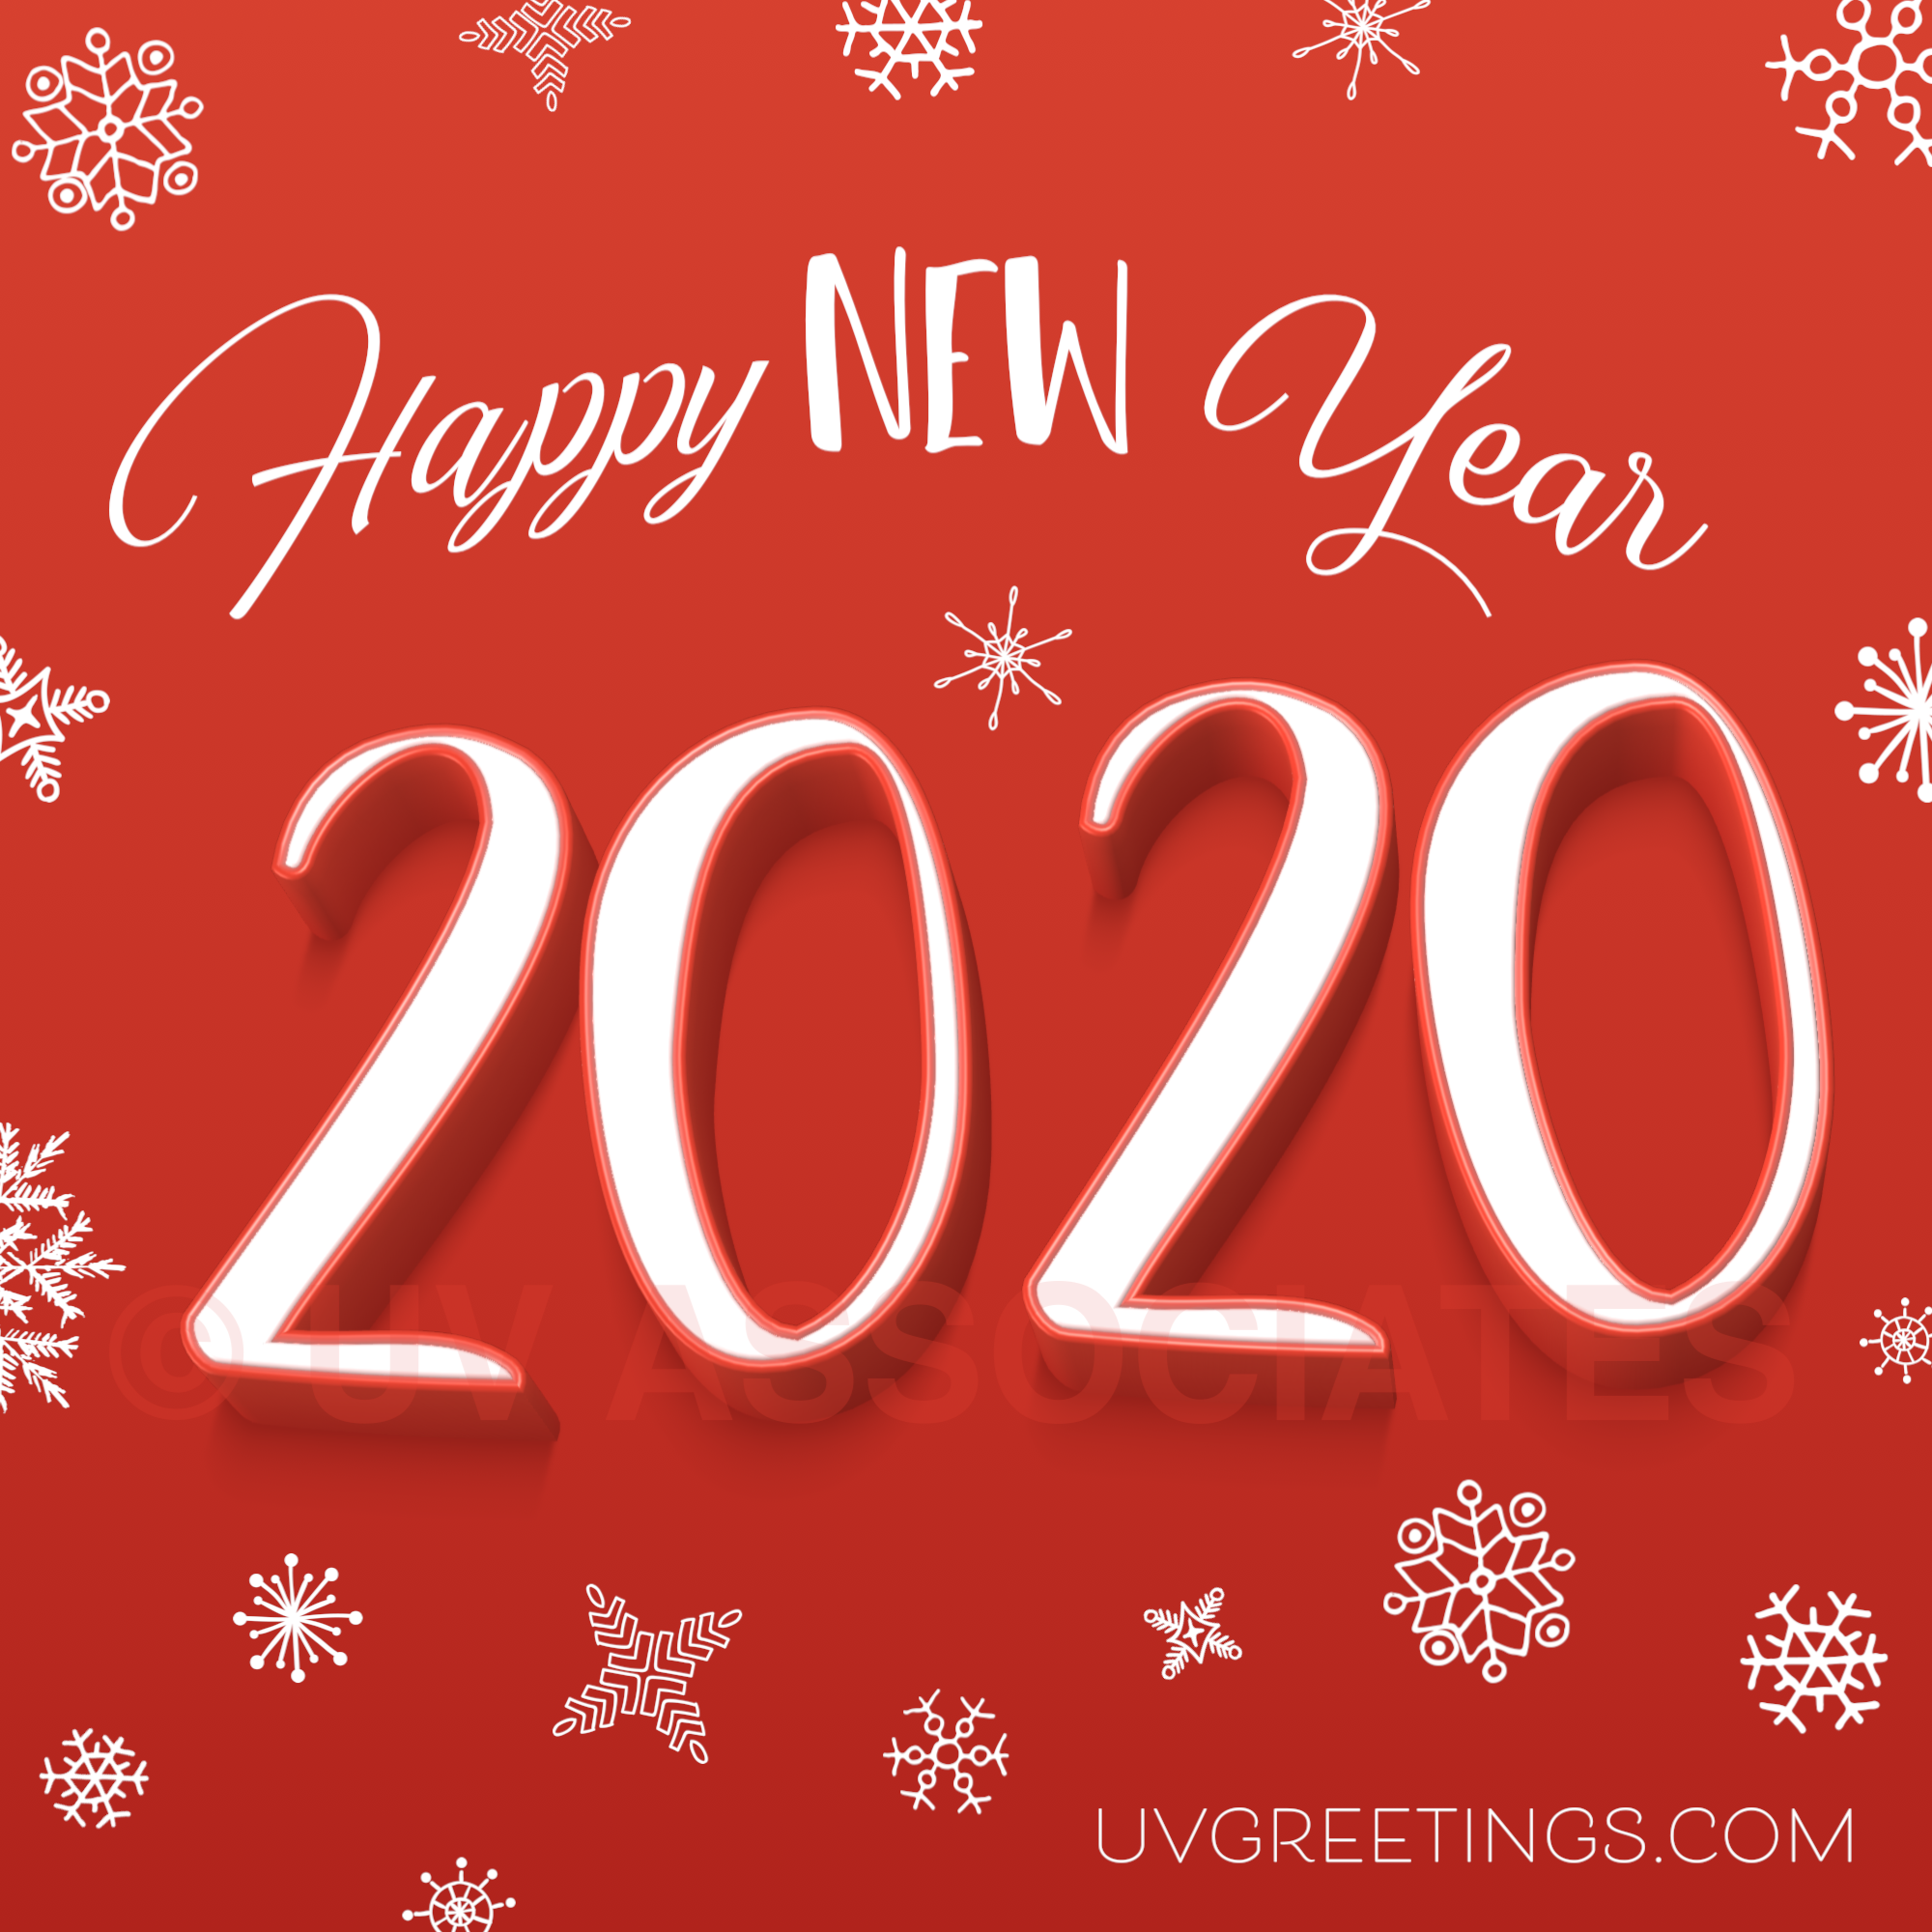 Snowflakes and a red Background and a 3d version of digits 2020!